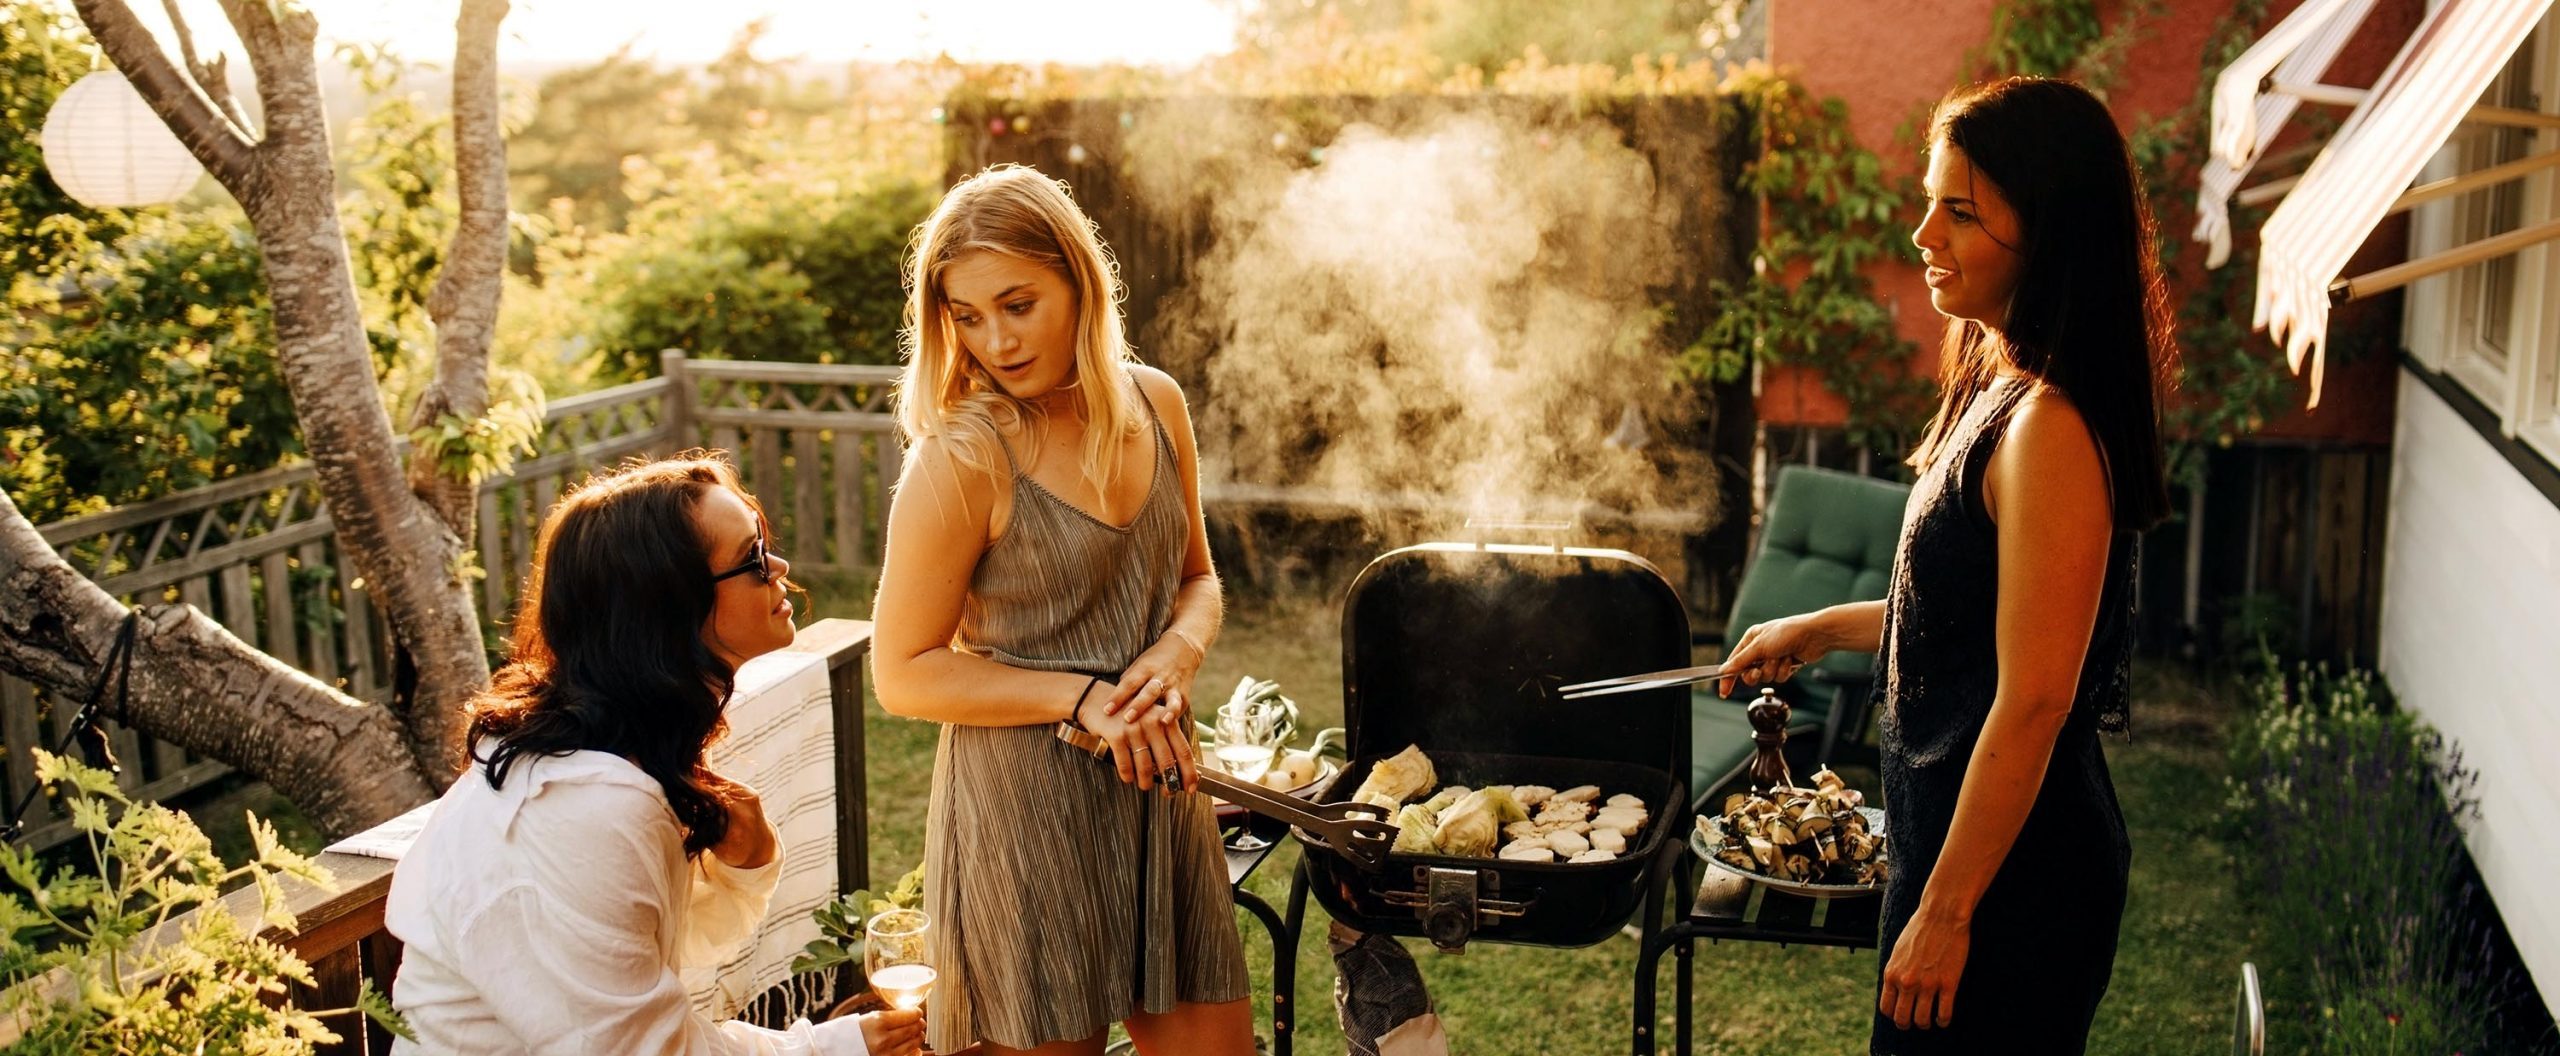 Three women chat while grilling in a sunny backyard.